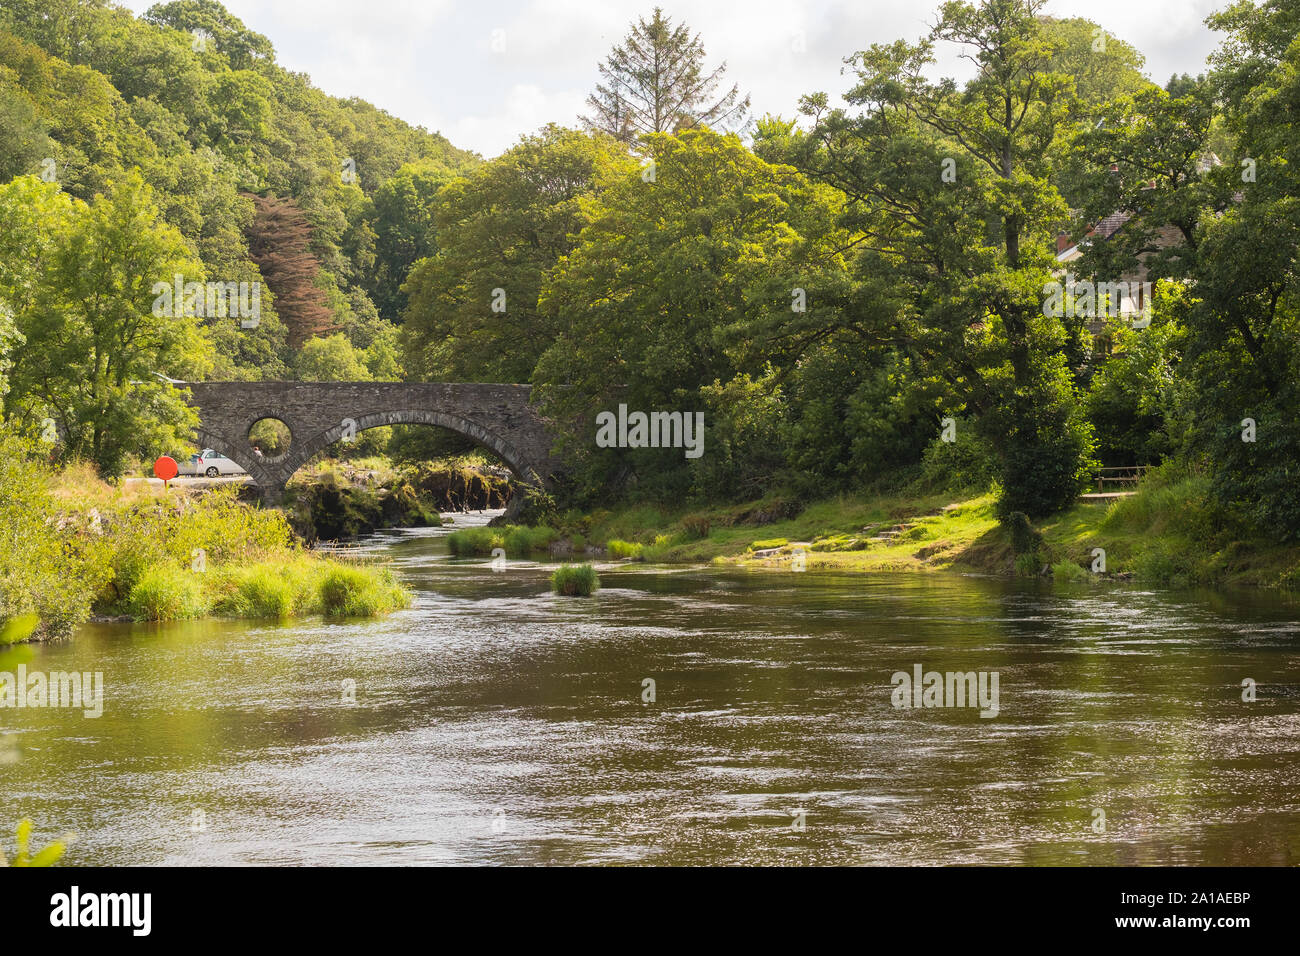 Travel and tourism: Summer afternoon, Cenarth and the River Teifi, Ceredigion , rural mid Wales UK Stock Photo